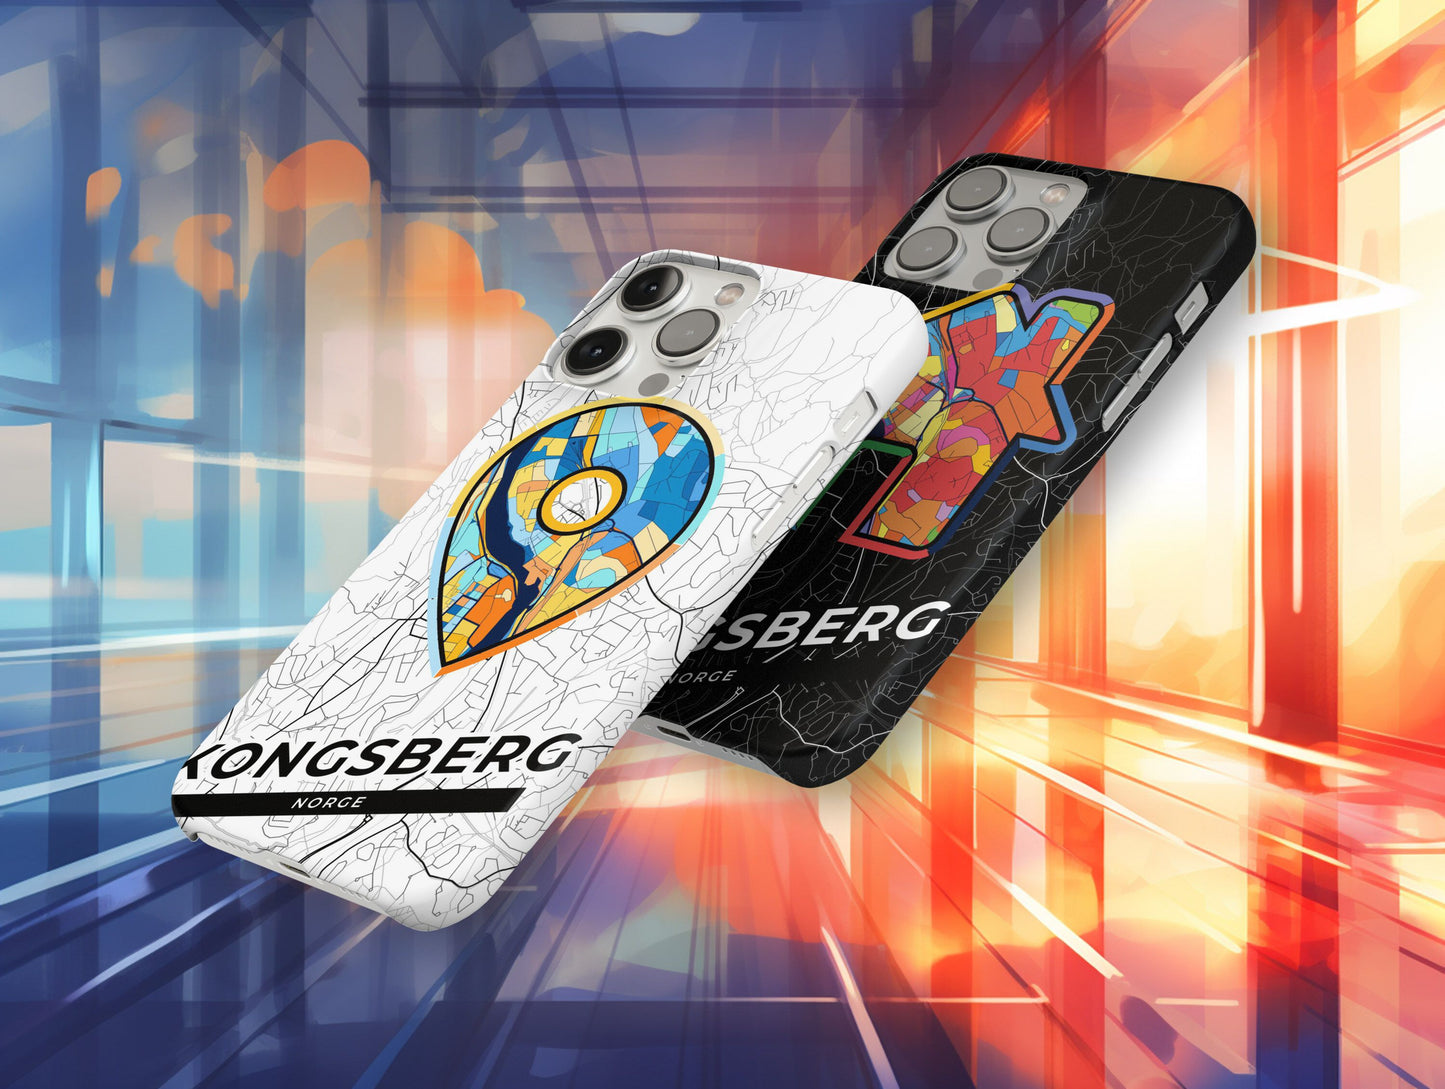 Kongsberg Norway slim phone case with colorful icon. Birthday, wedding or housewarming gift. Couple match cases.